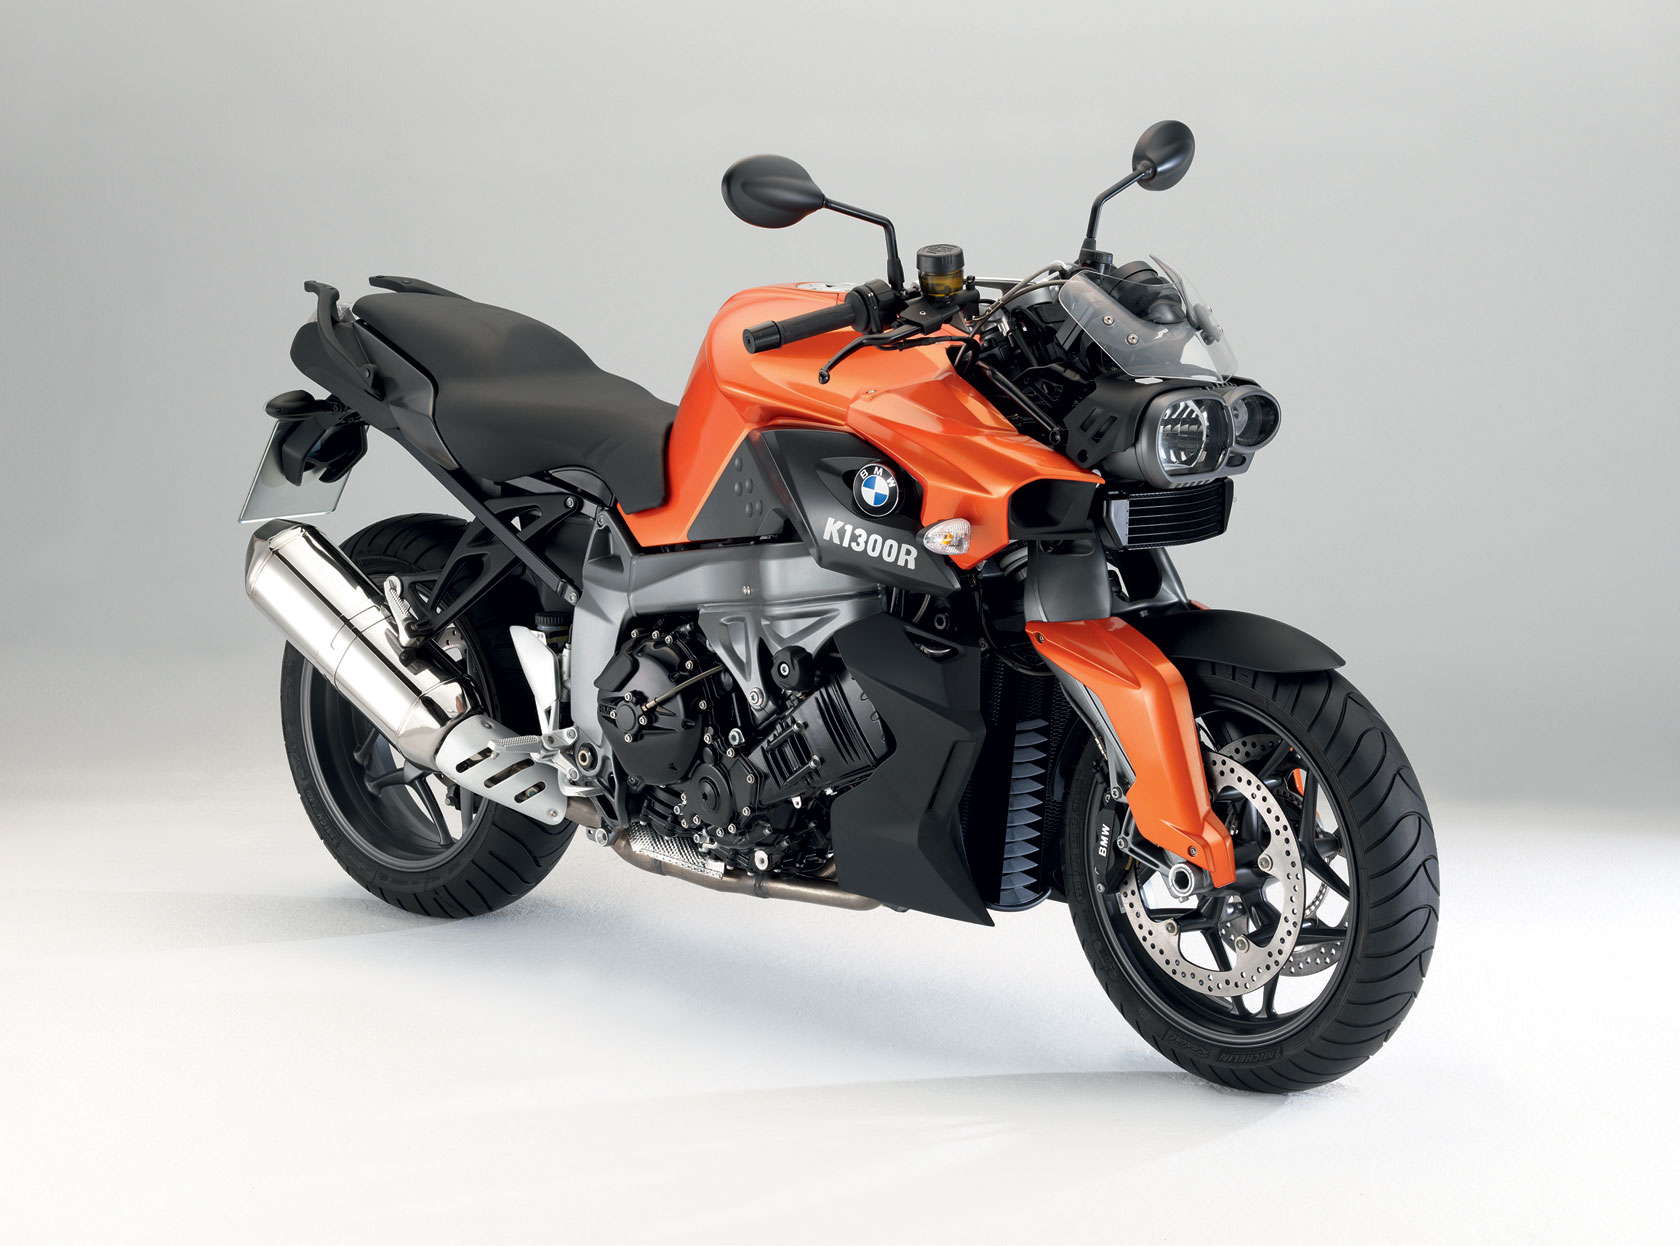 2009 BMW K1300R Insurance Information, pictures, specs